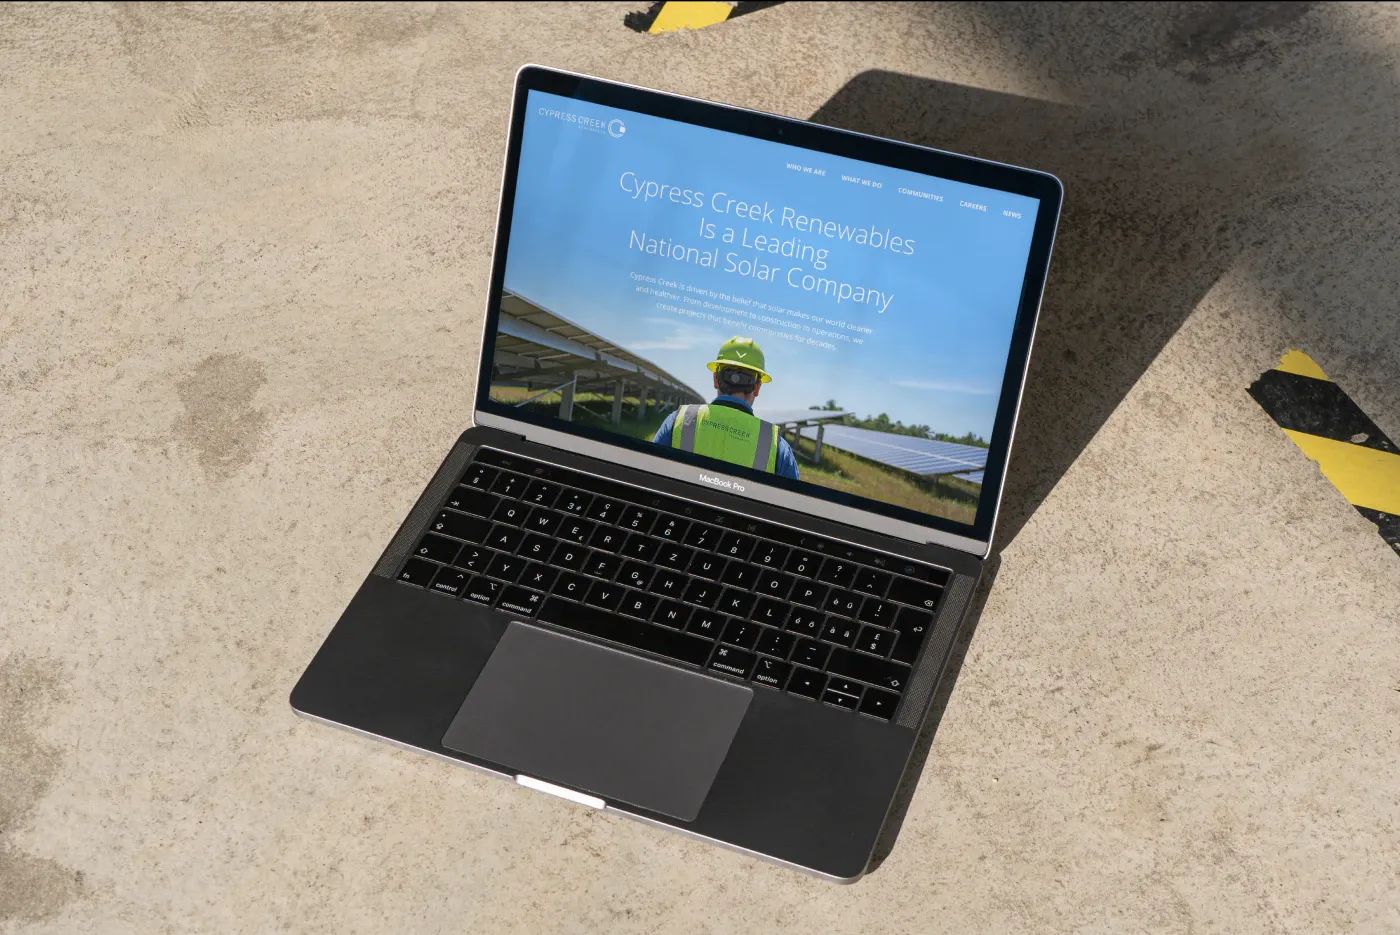 Image of a laptop opened on website on a cement surface.